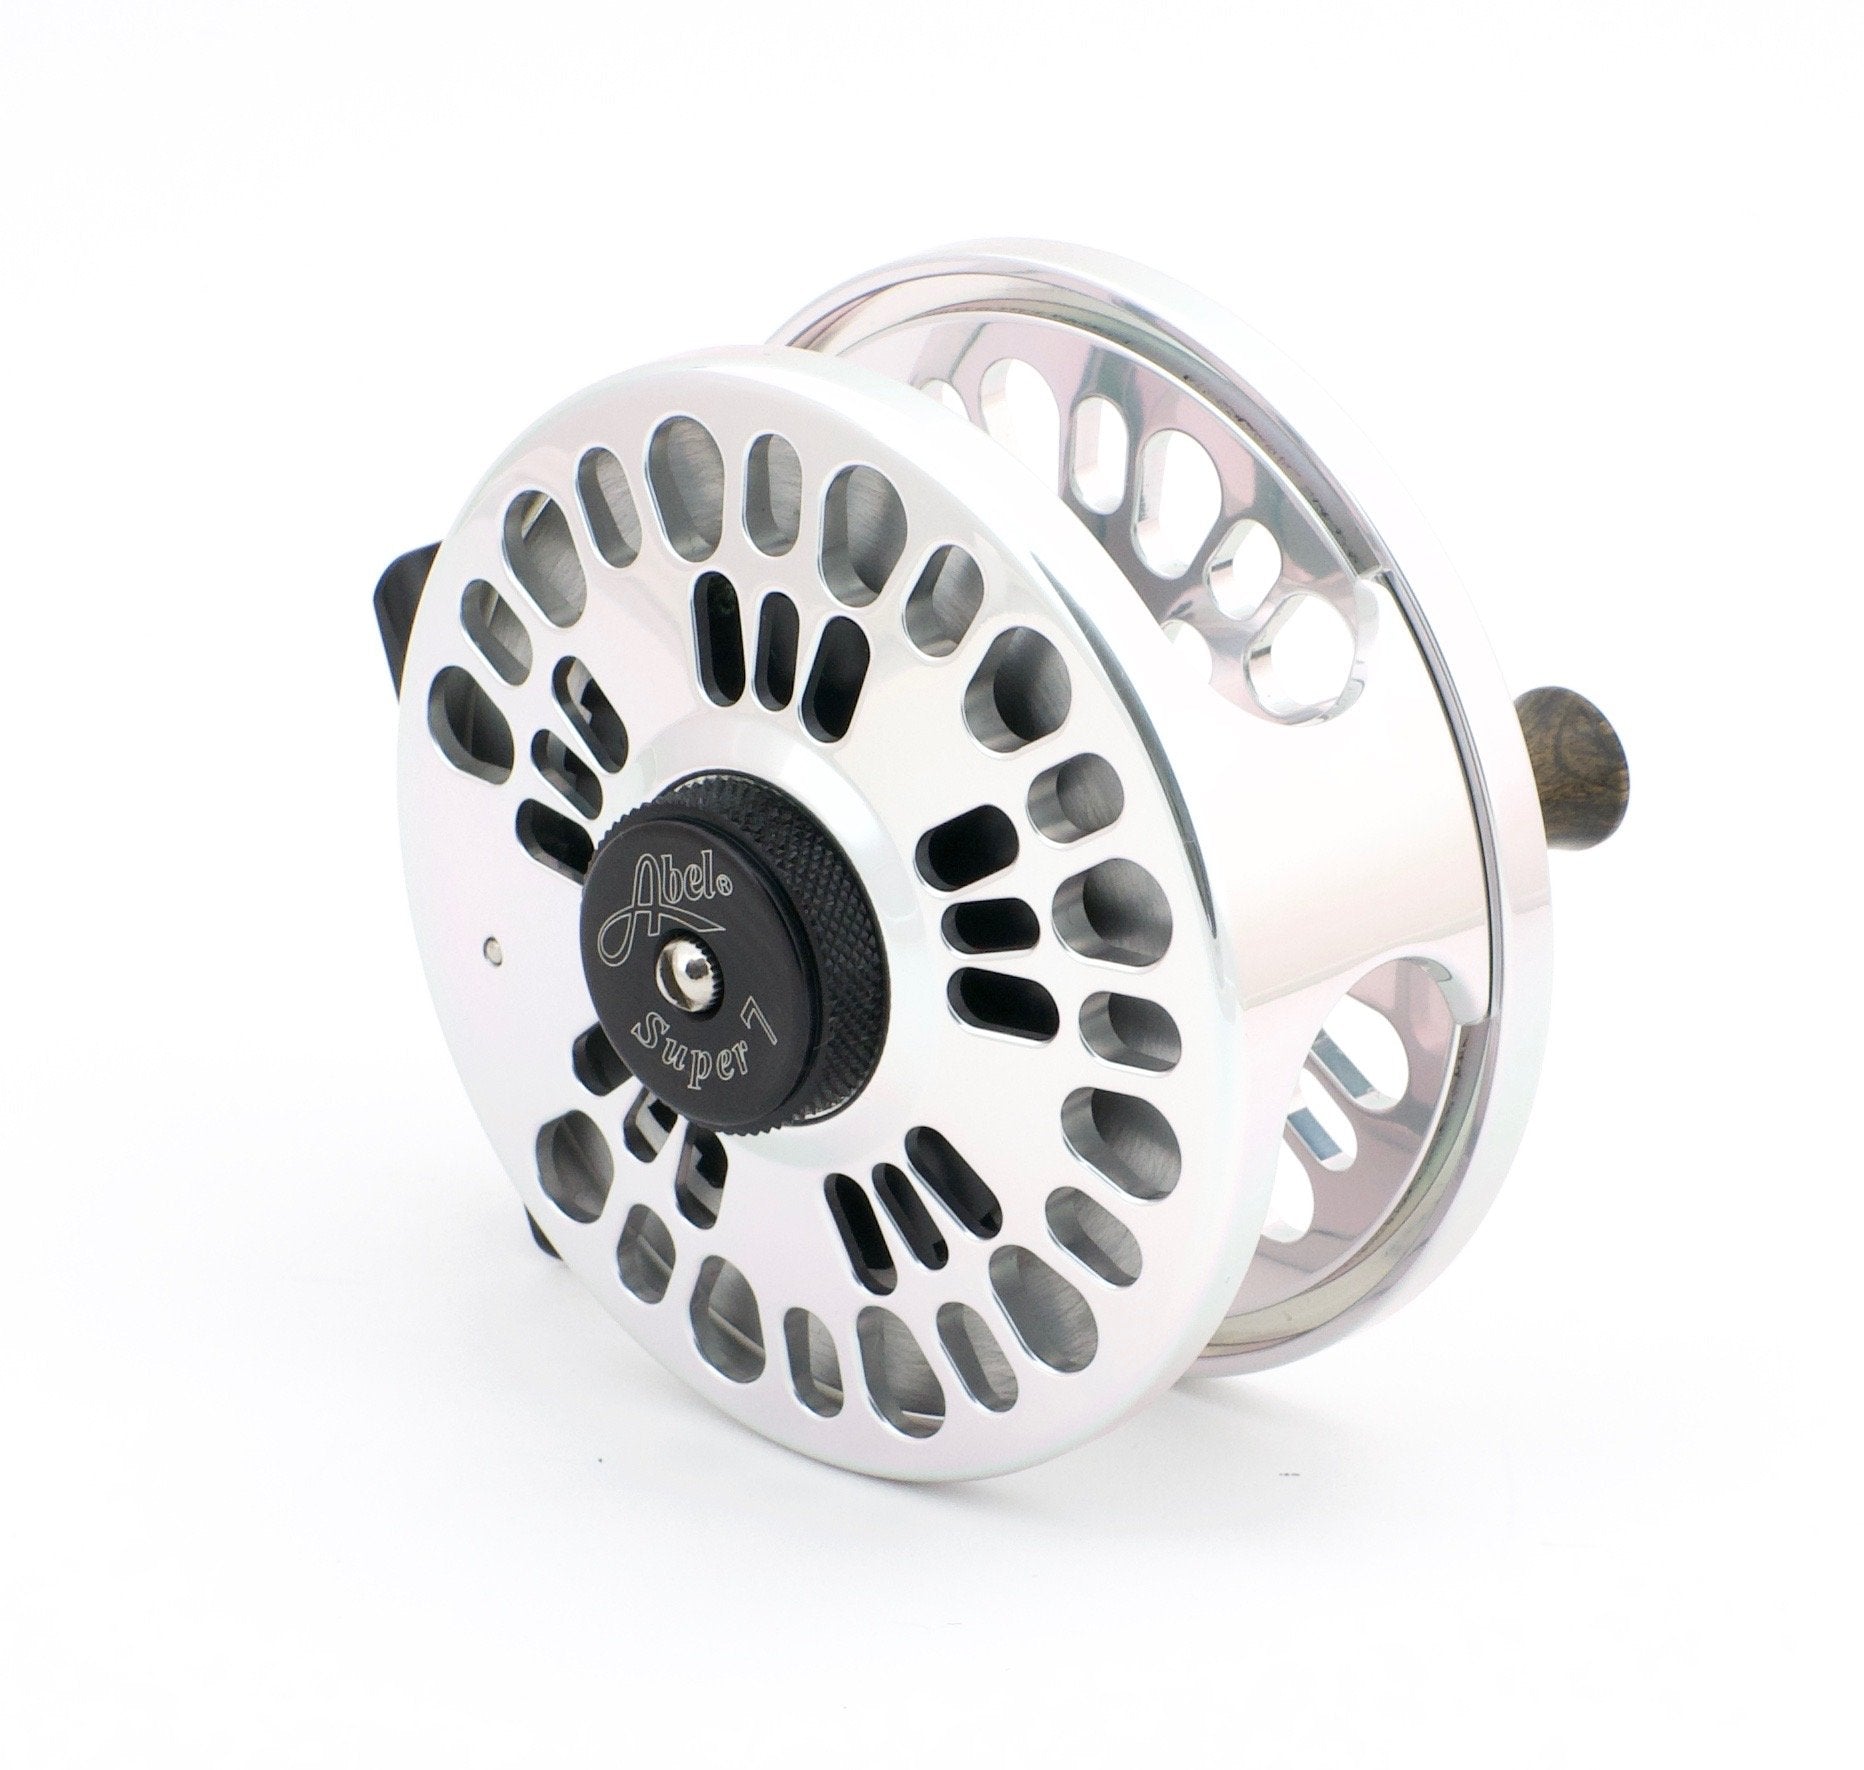 Abel Super 7 Fly Reel and Spare Spool - Spinoza Rod Company